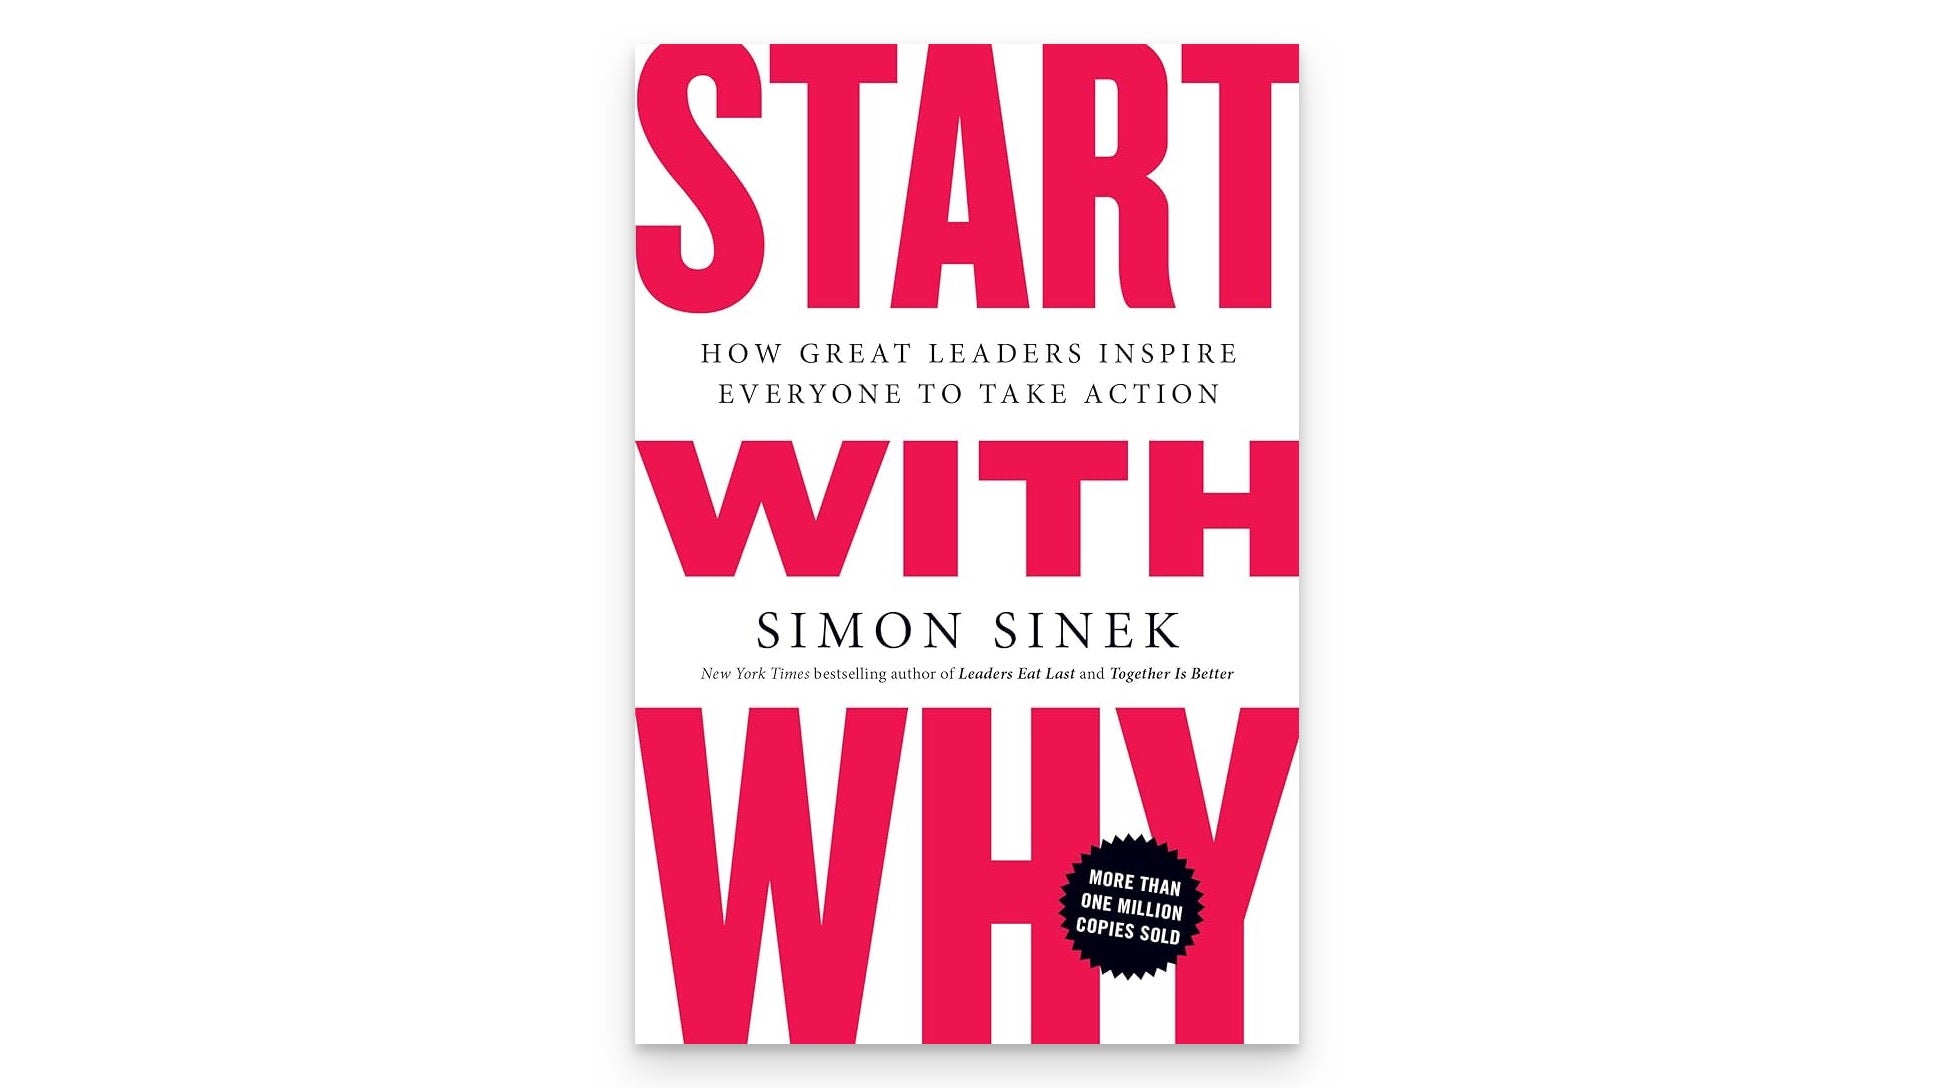 Start with why book cover by Simon Sinek